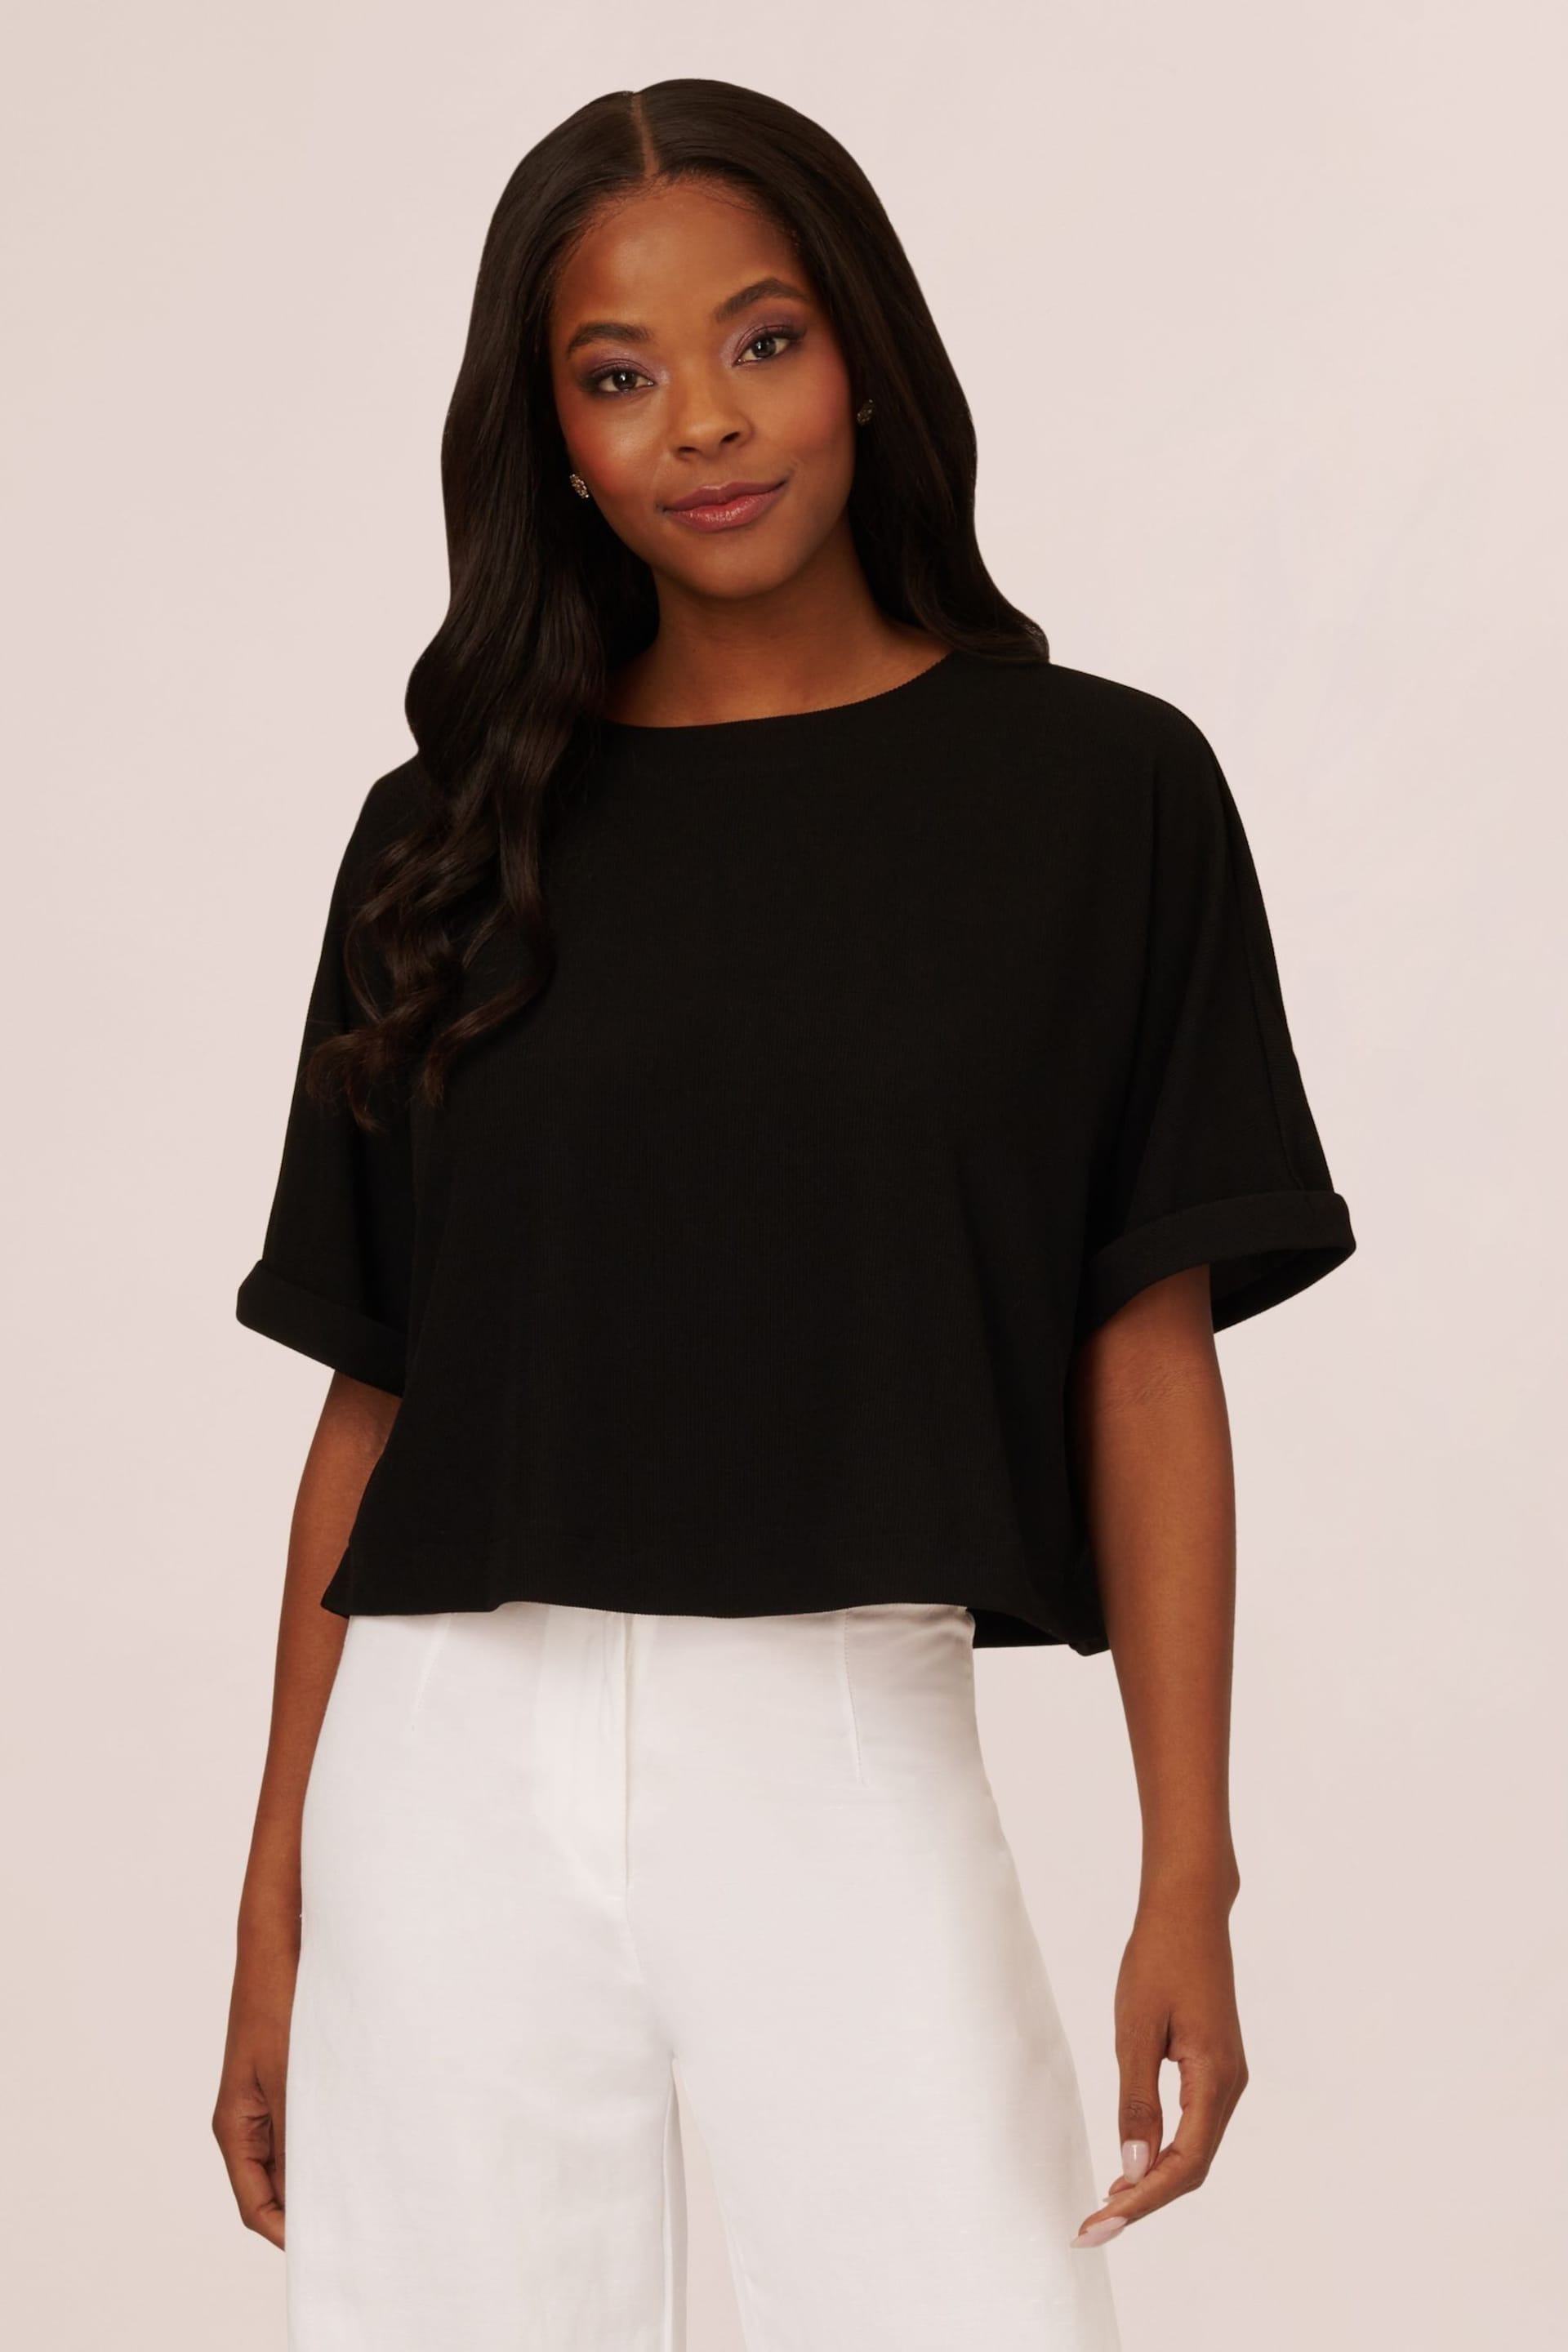 Adrianna Papell Mini Rib Crop Button Back Knit Black Top - Image 1 of 6